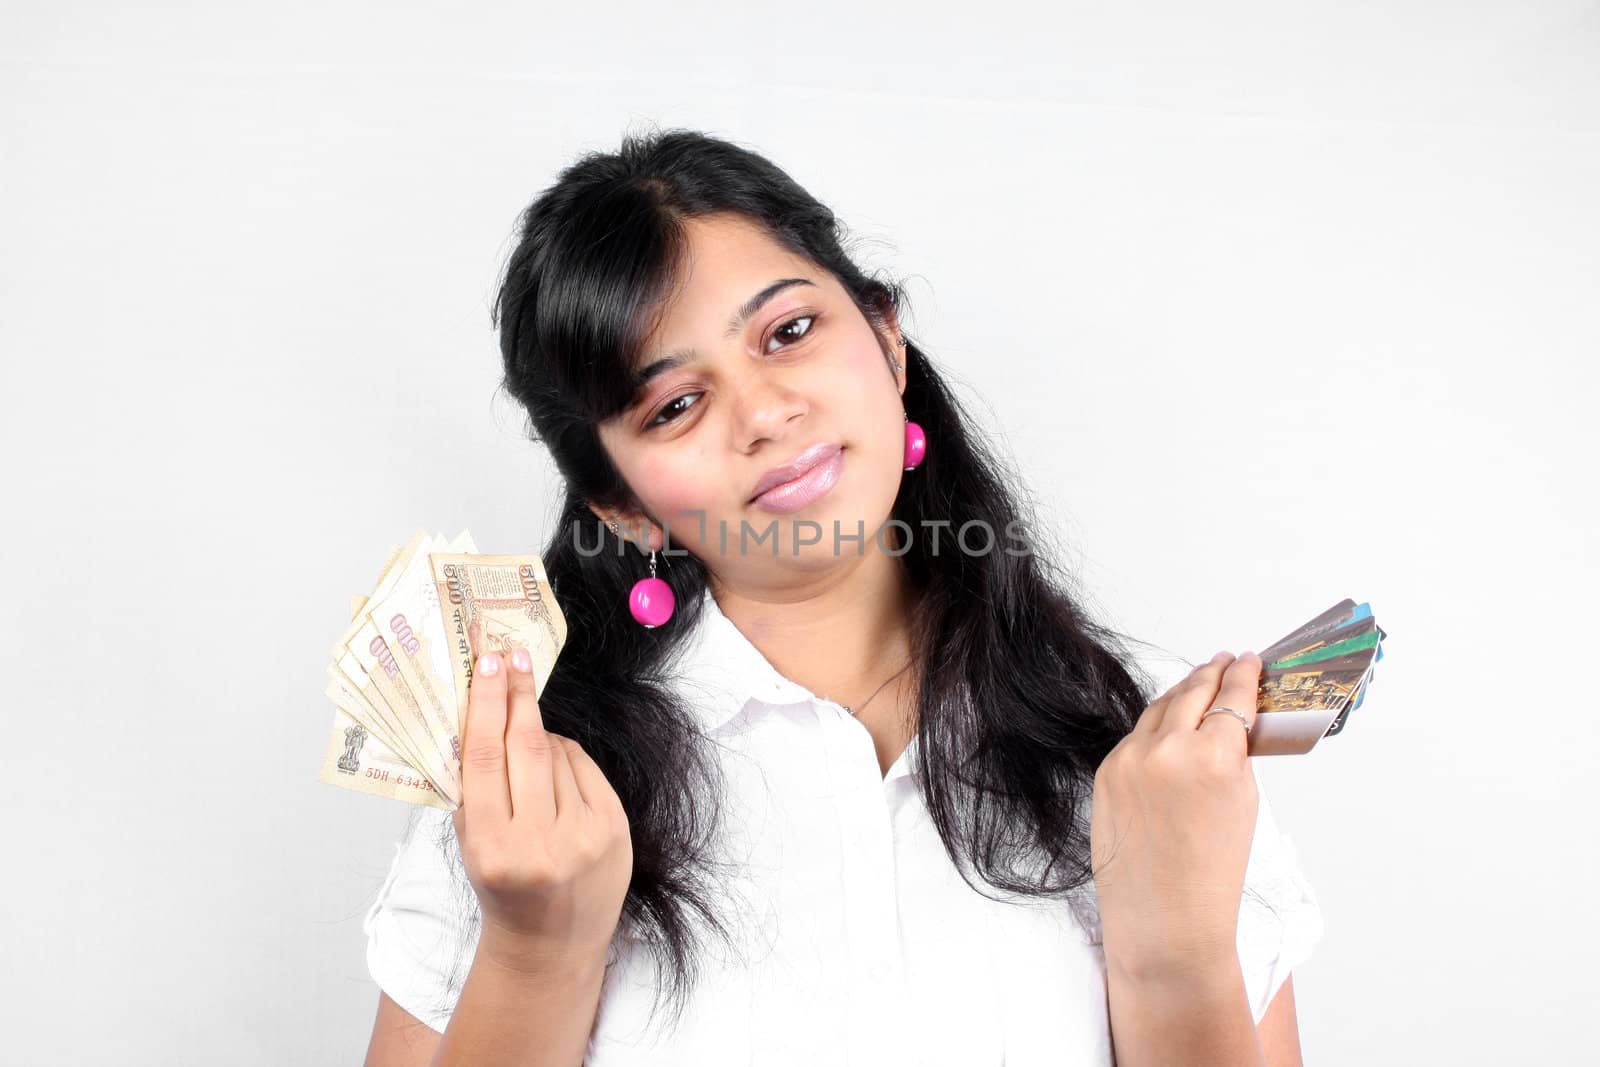 A rich Indian girl showing off her cash (Indian currency) and many credit cards.